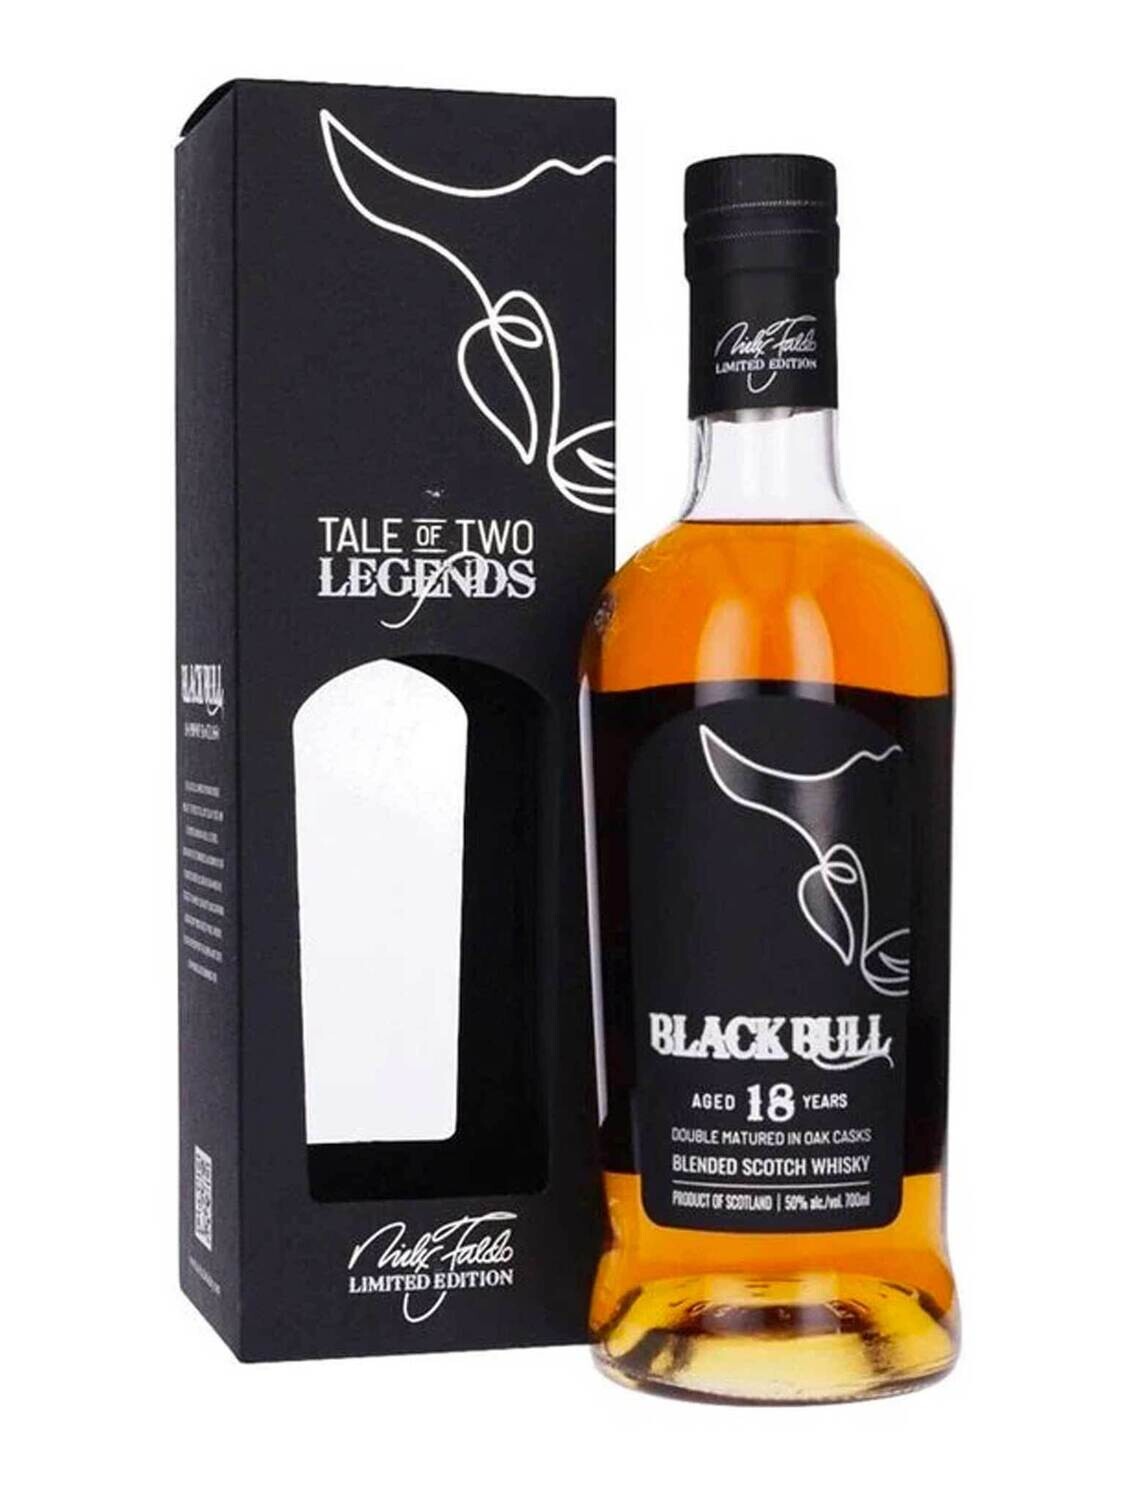 Black Bull 18 Year Old Tale of Two Legends Scotch Whisky 50% ABV 750mL